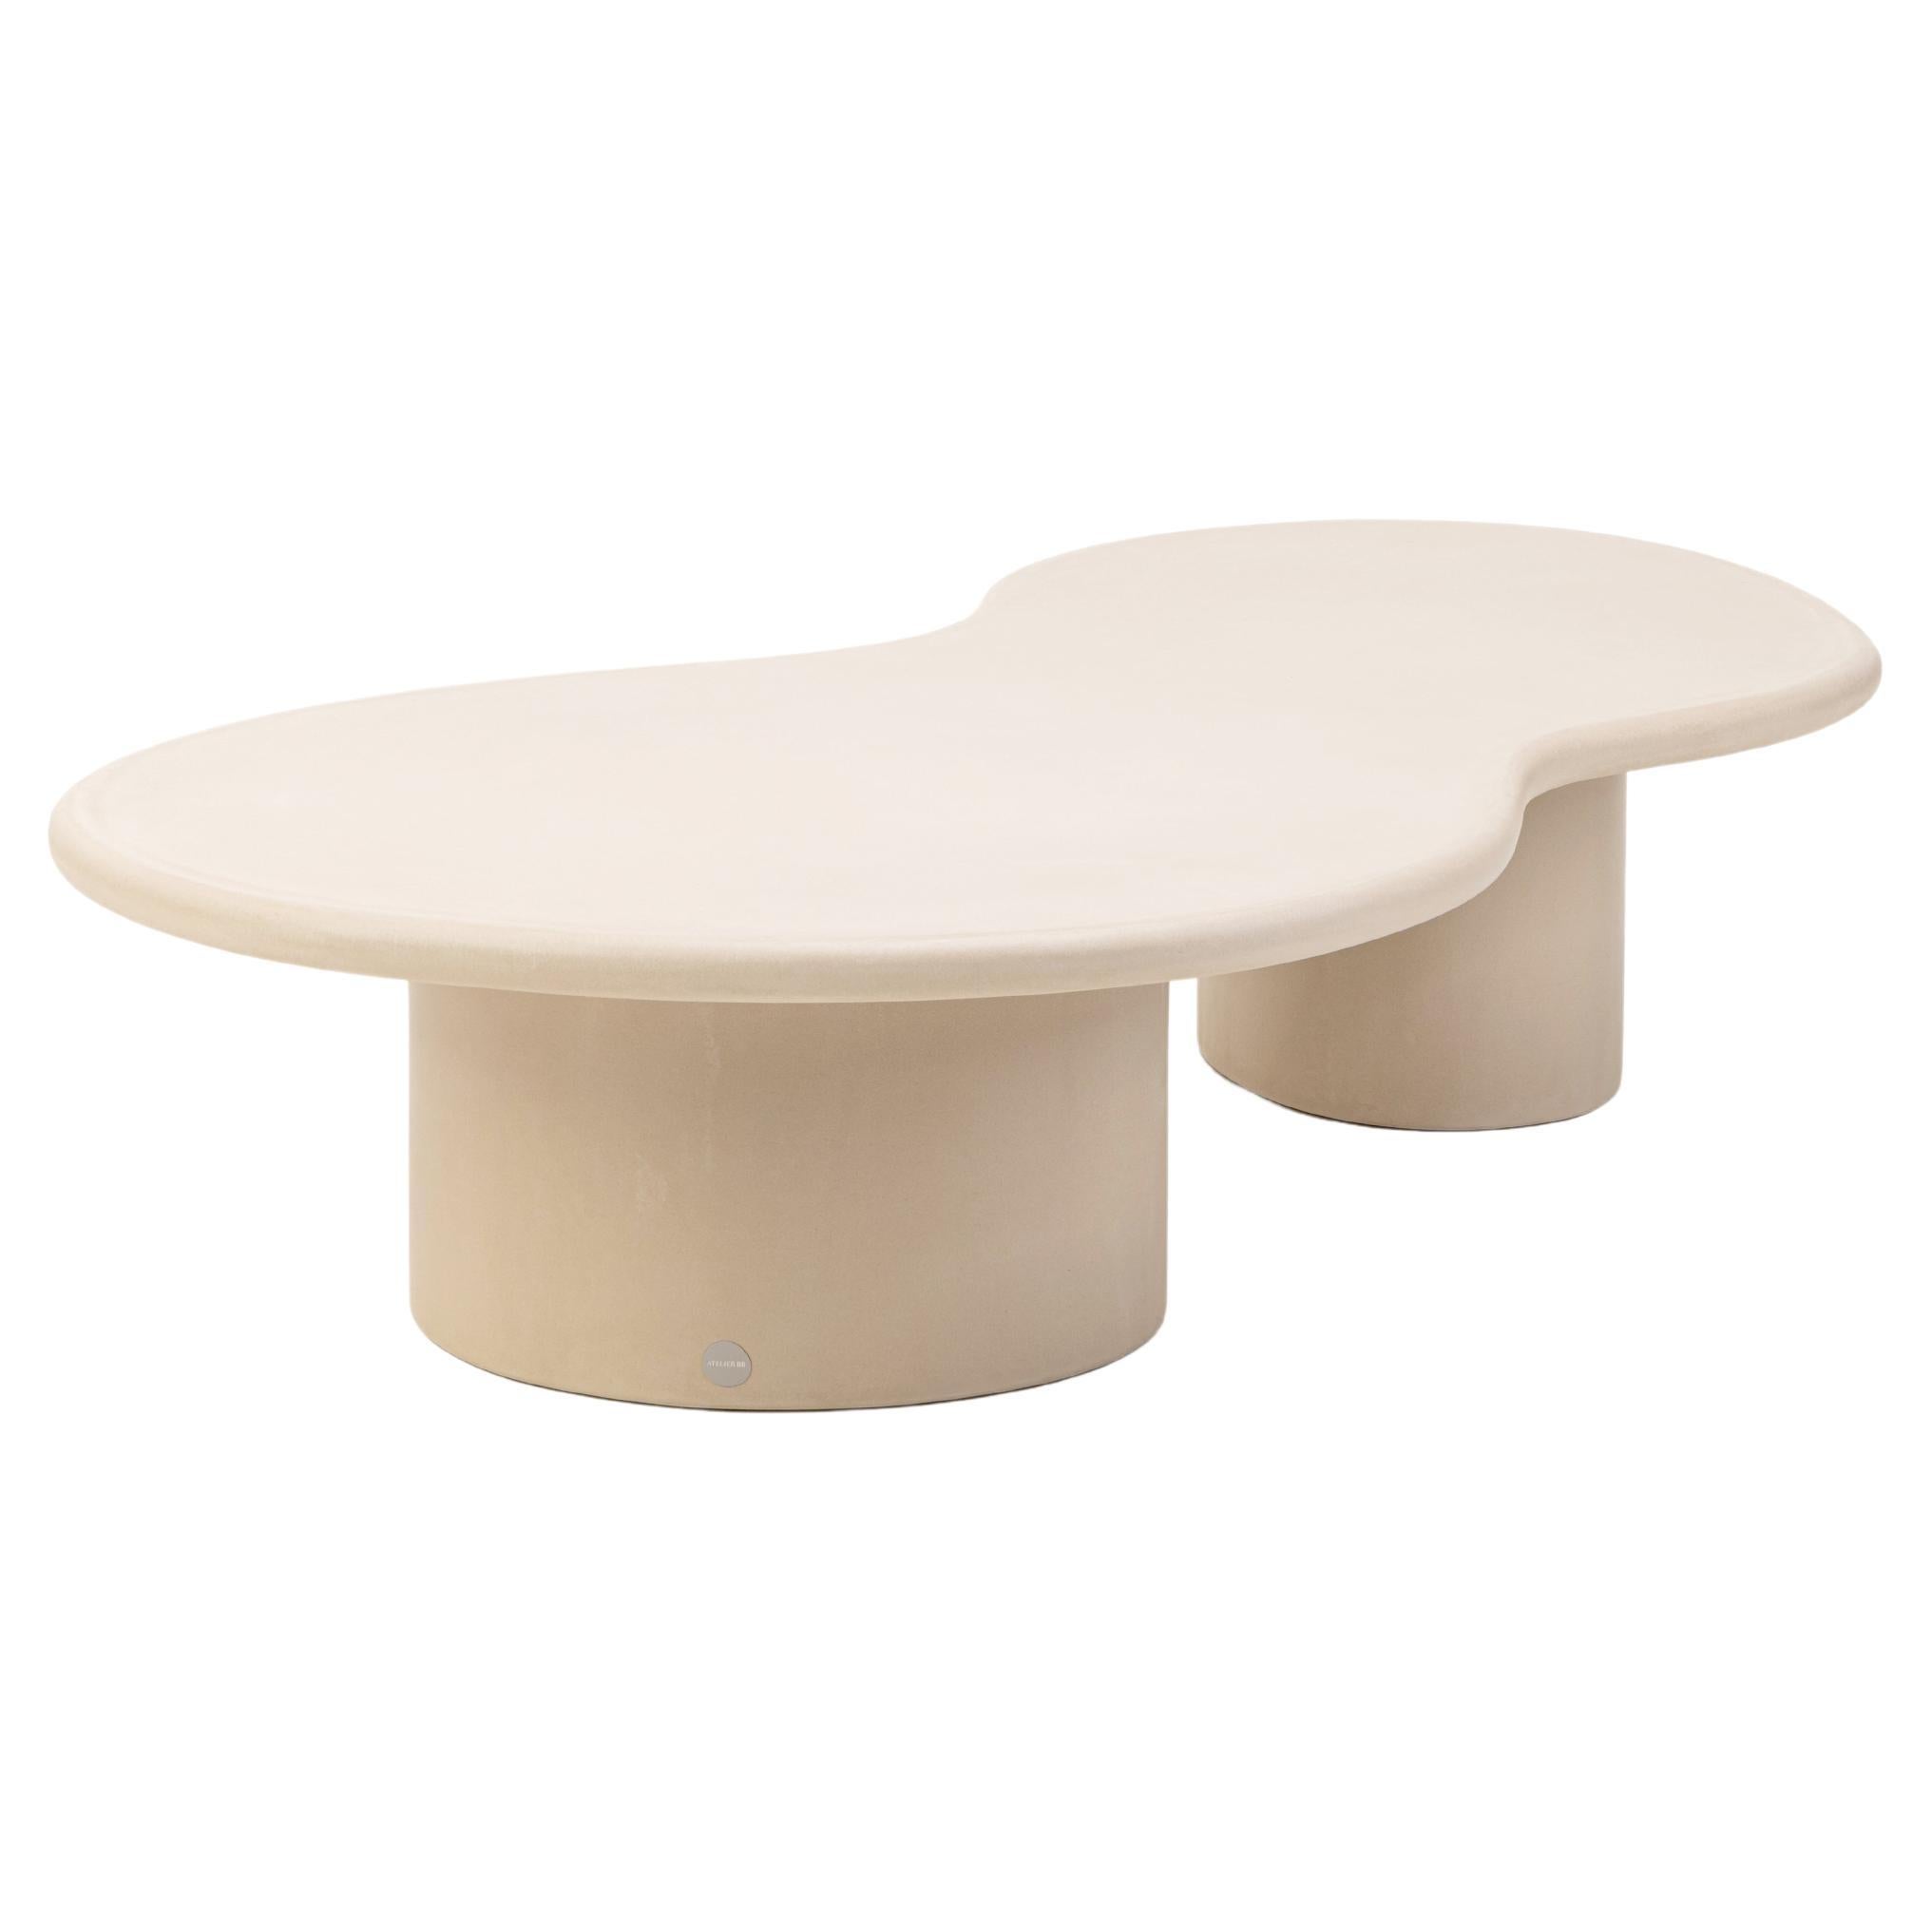 Organic Shaped Natural Plaster Coffee Table "Ovum" 150 by Isabelle Beaumont For Sale